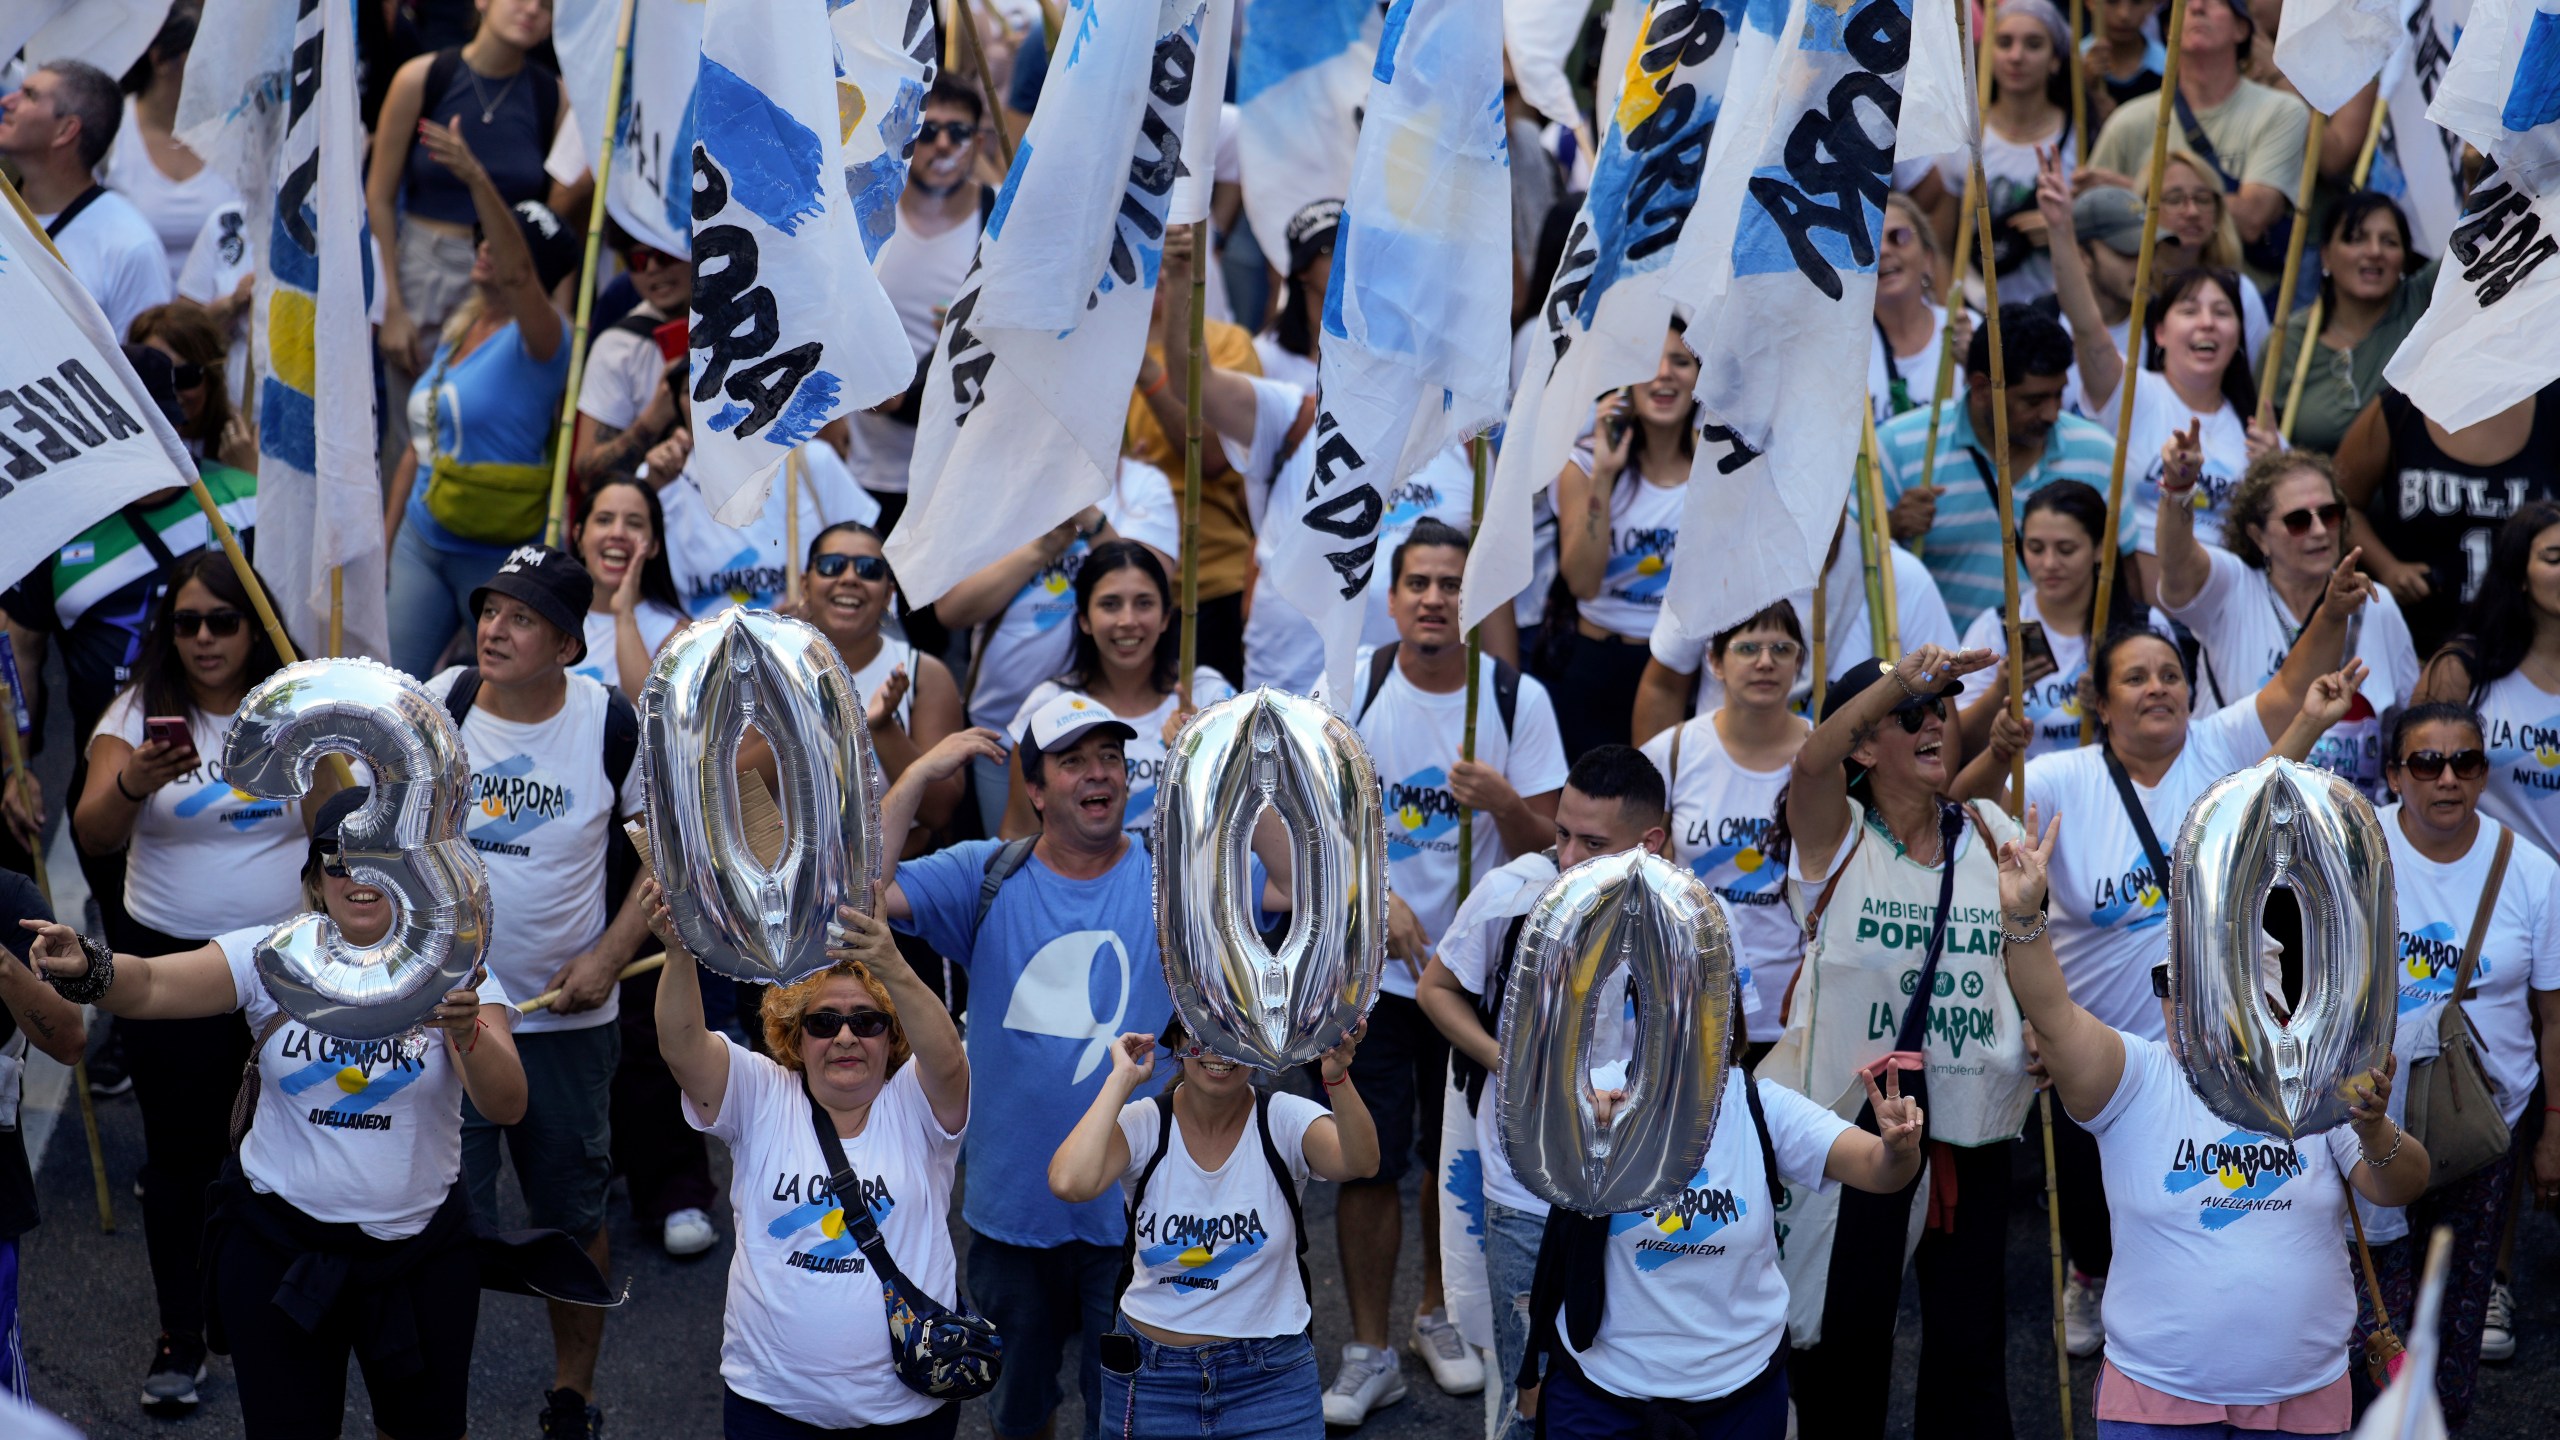 Demonstrators carry inflatables shaped like the number 30,000, referring to the number of people who, according to human rights groups, disappeared during the 1976-1983 military dictatorship, during a march commemorating the 48th anniversary of the coup in Buenos Aires, Argentina, Sunday, March 24, 2024. (AP Photo/Natacha Pisarenko)